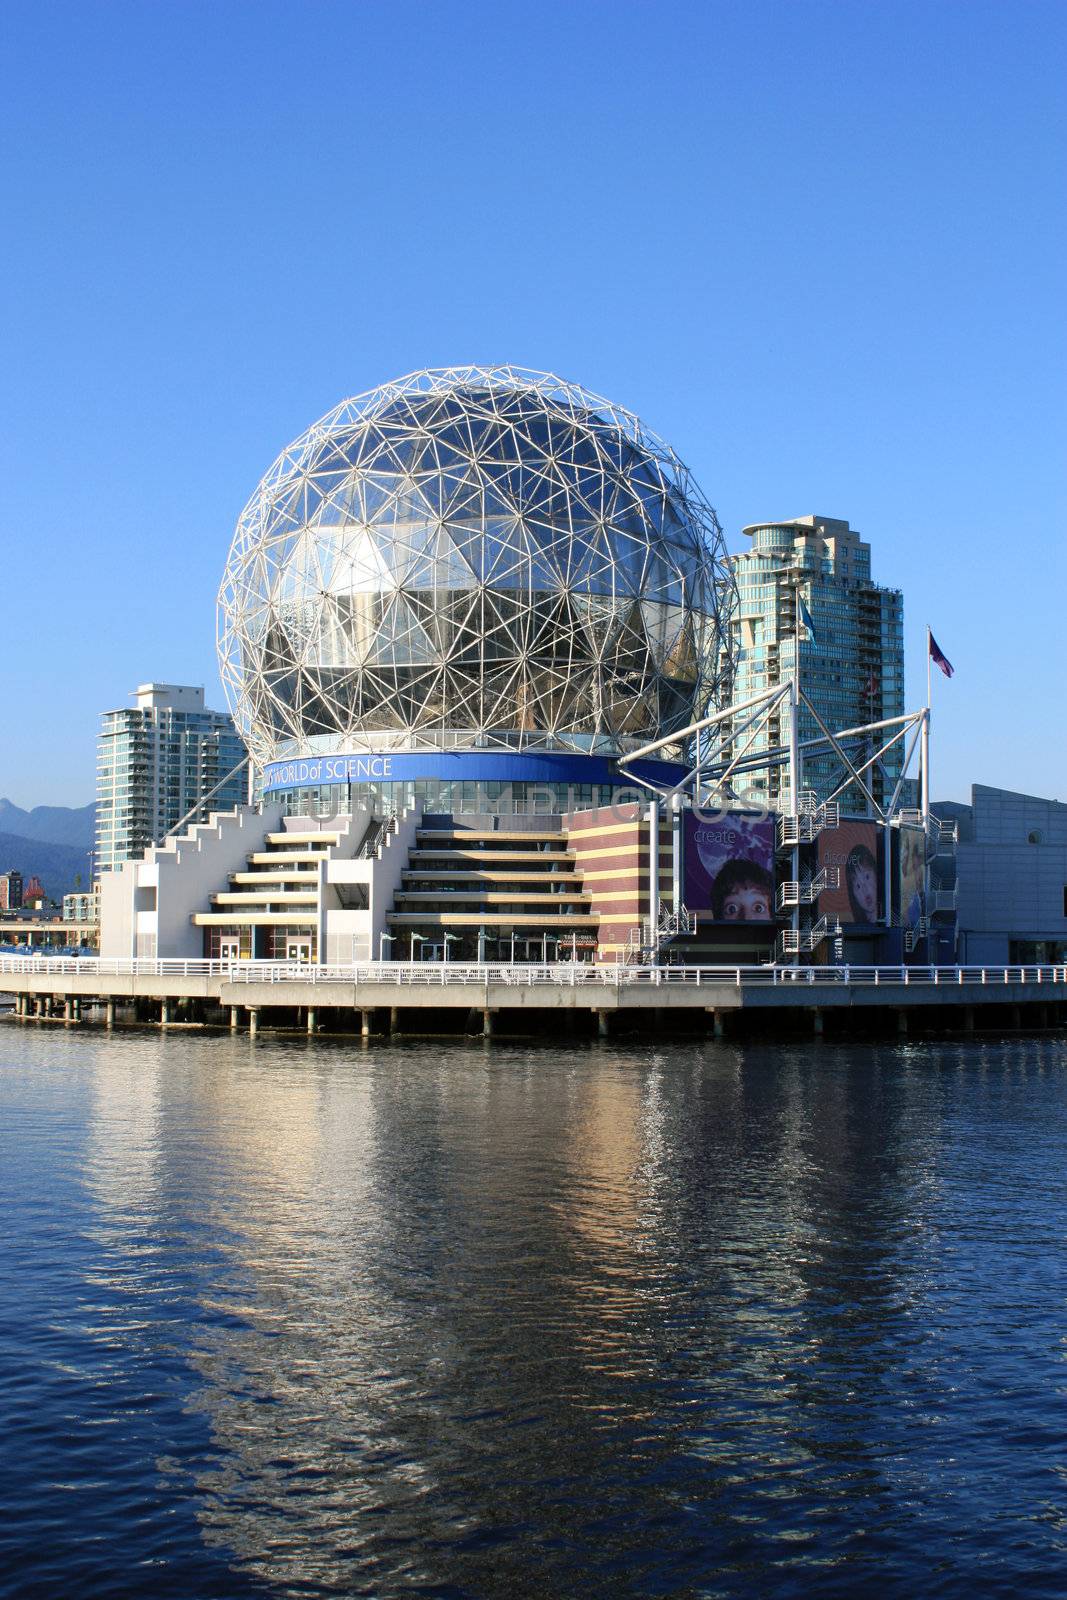 Science World In Vancouver by mmgphoto